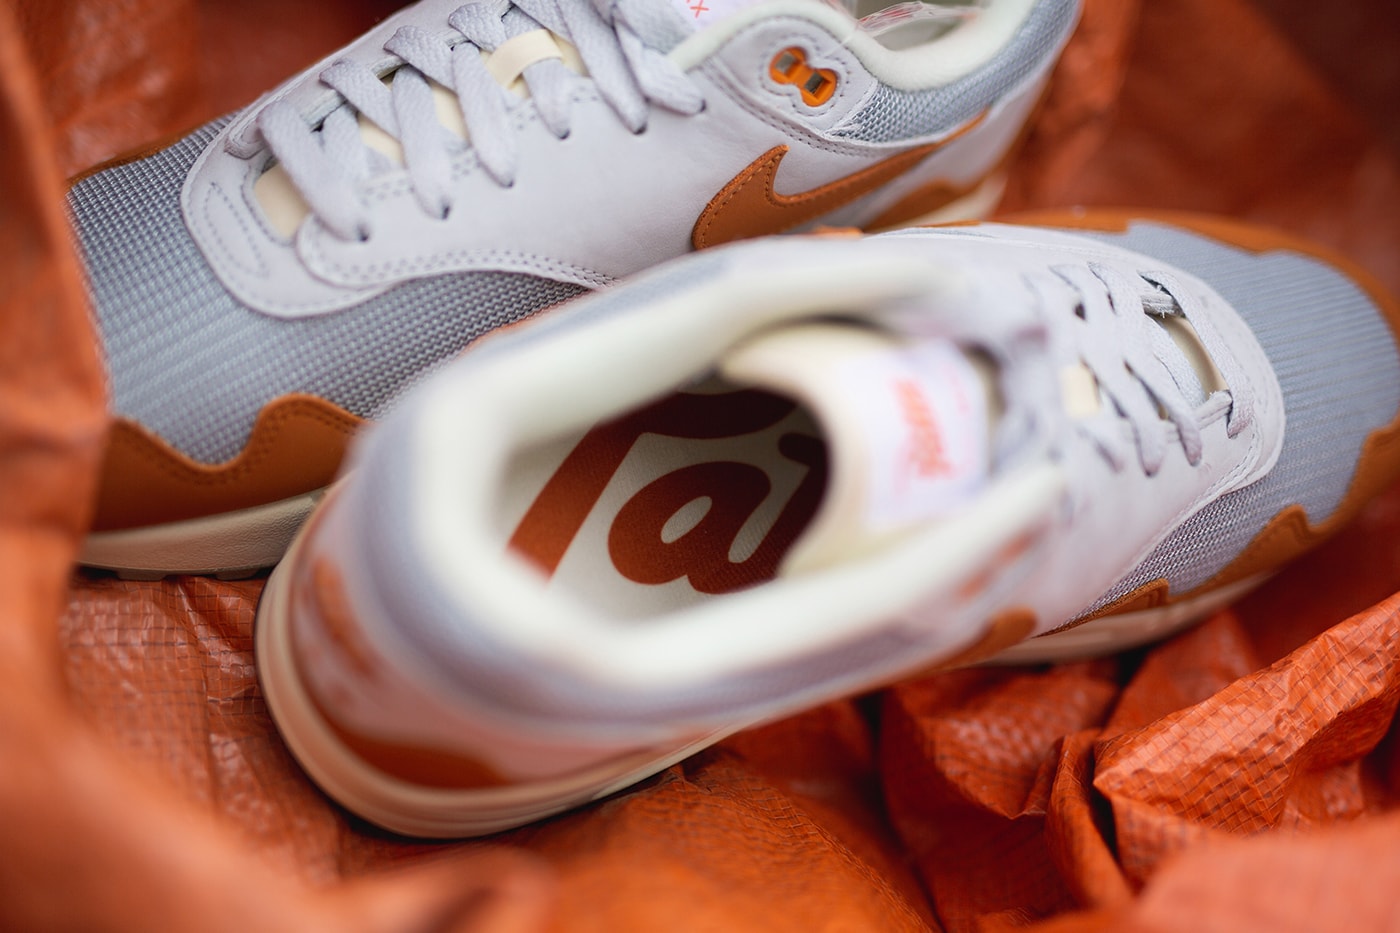 Patta Nike Air Max 1 "Monarch" Closer Look Release Info DH1348-001 Date Buy Price 